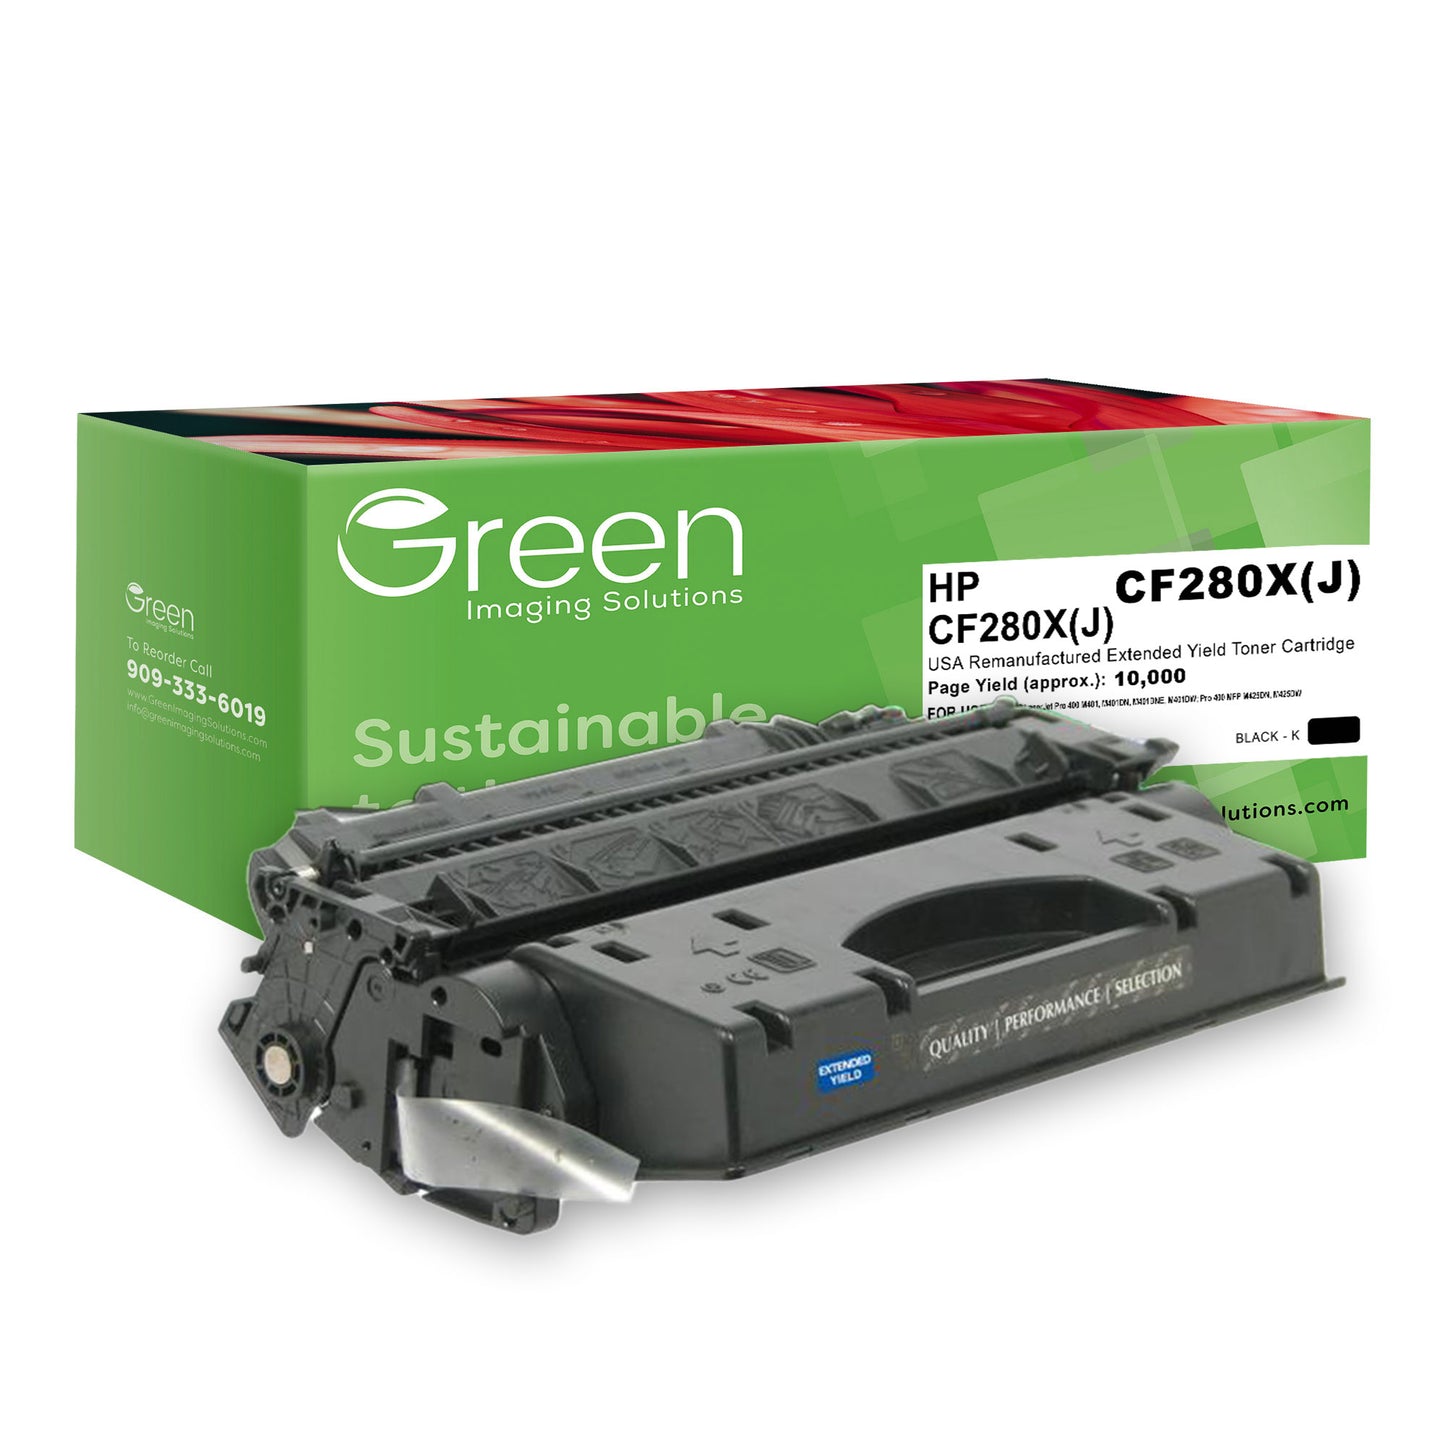 GIS USA Remanufactured Extended Yield Toner Cartridge for HP CF280X